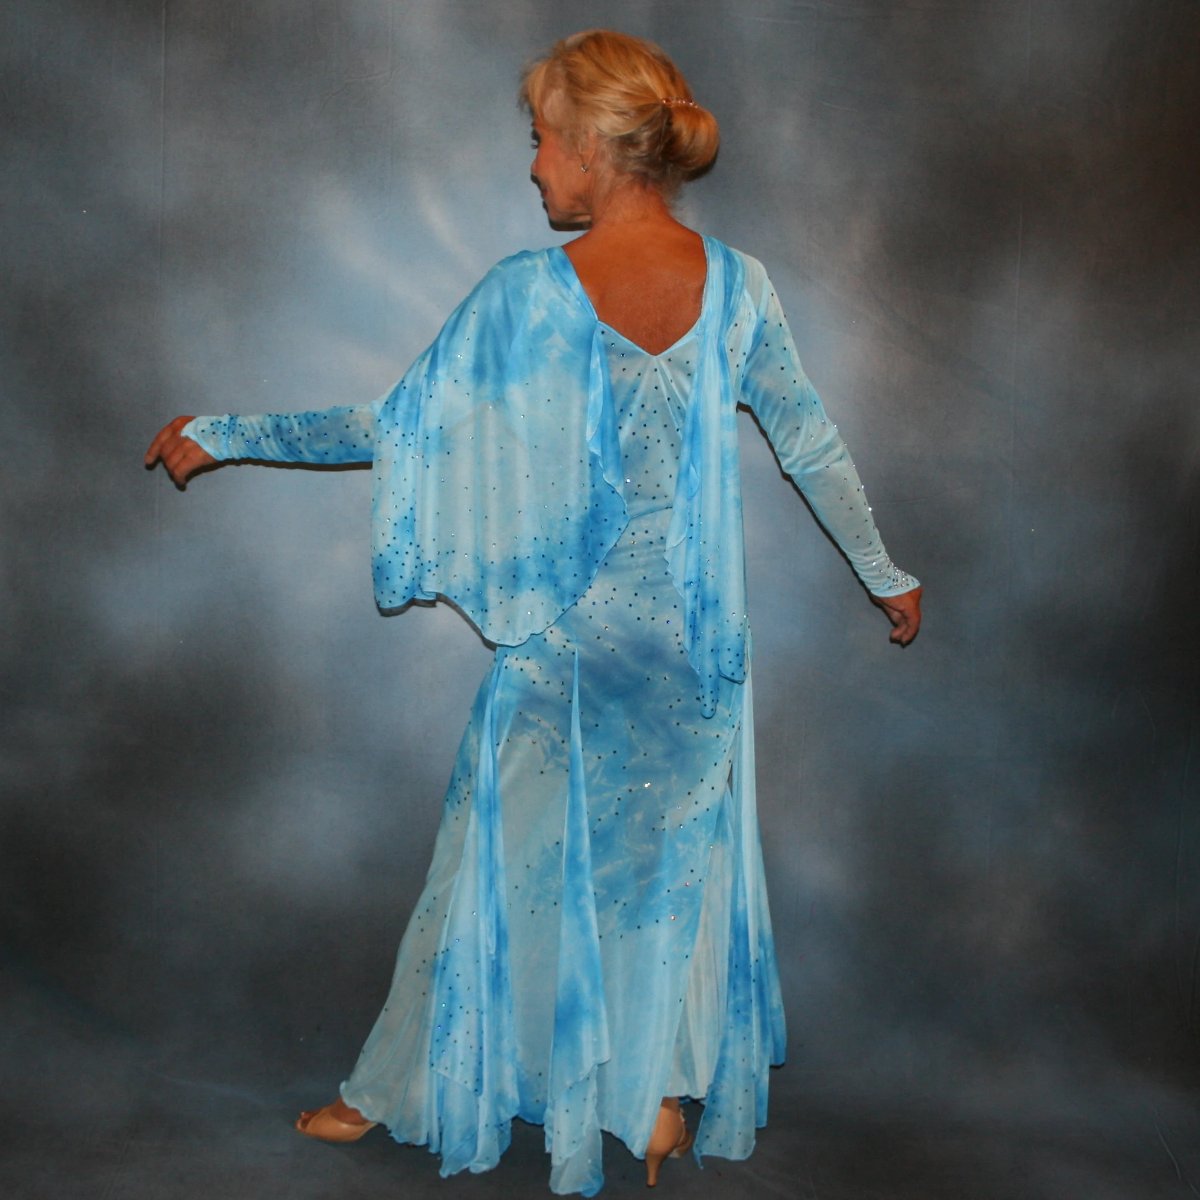 Crystal's Creations left back view of Elegant blue ballroom dress created in shades of blue printed semi sheer stretch with floats, fabulous for a solo ballroom dance or a theatrical ballroom number…embellished with Swarovski rhinestone work in shades of capri blue & aquamarine